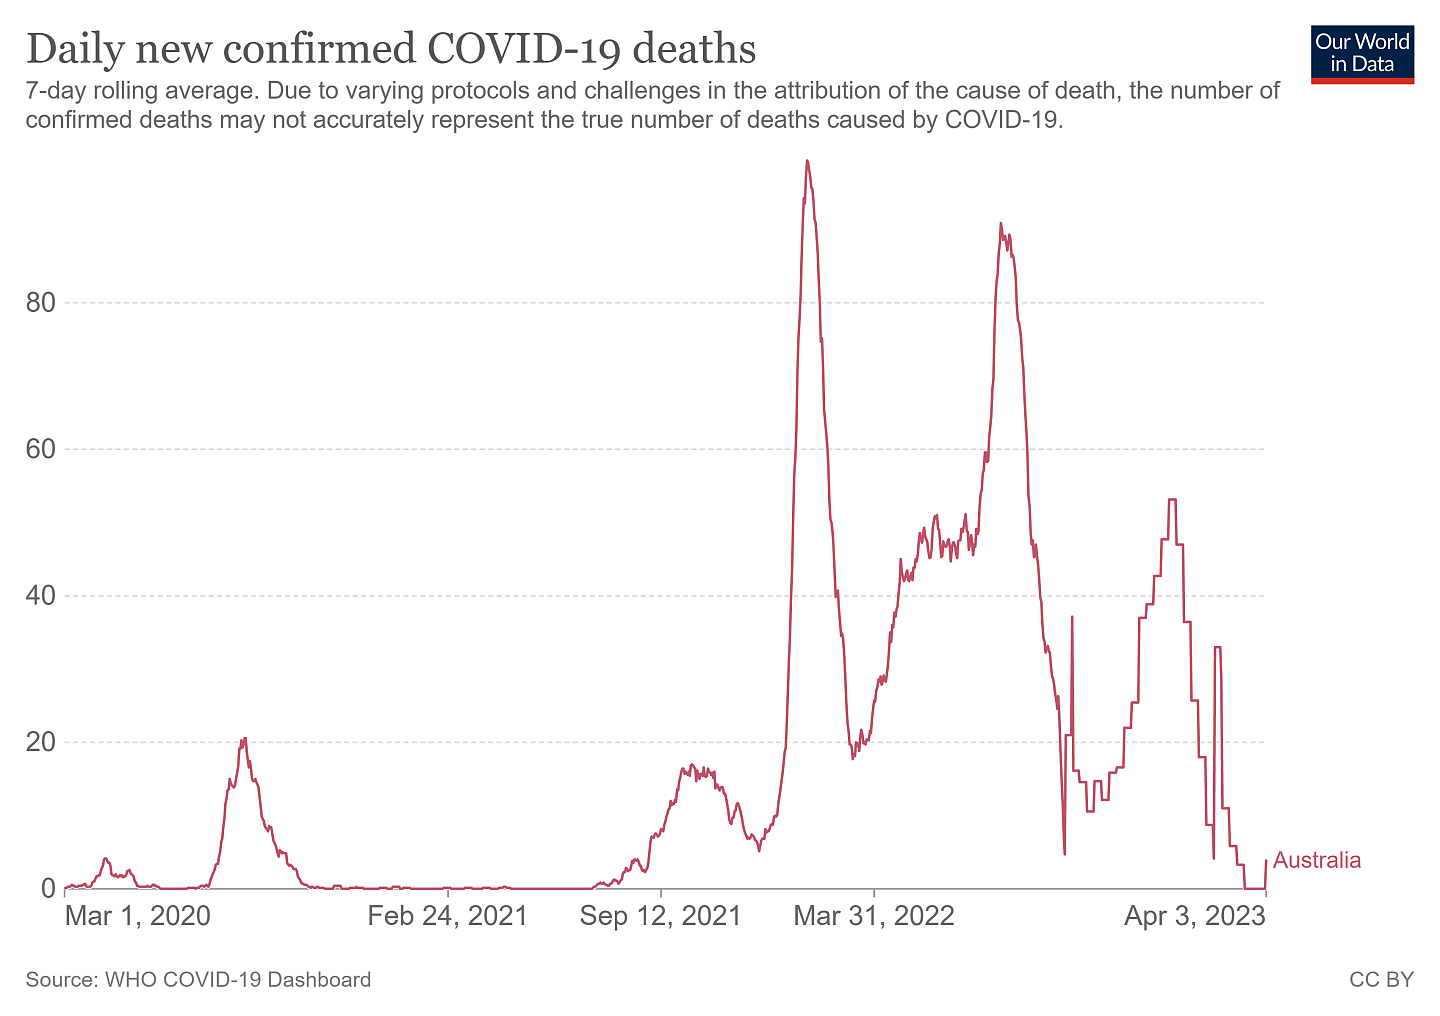 Chart showing a red line rising and falling to represent COVID deaths over time peaking in March 2022.